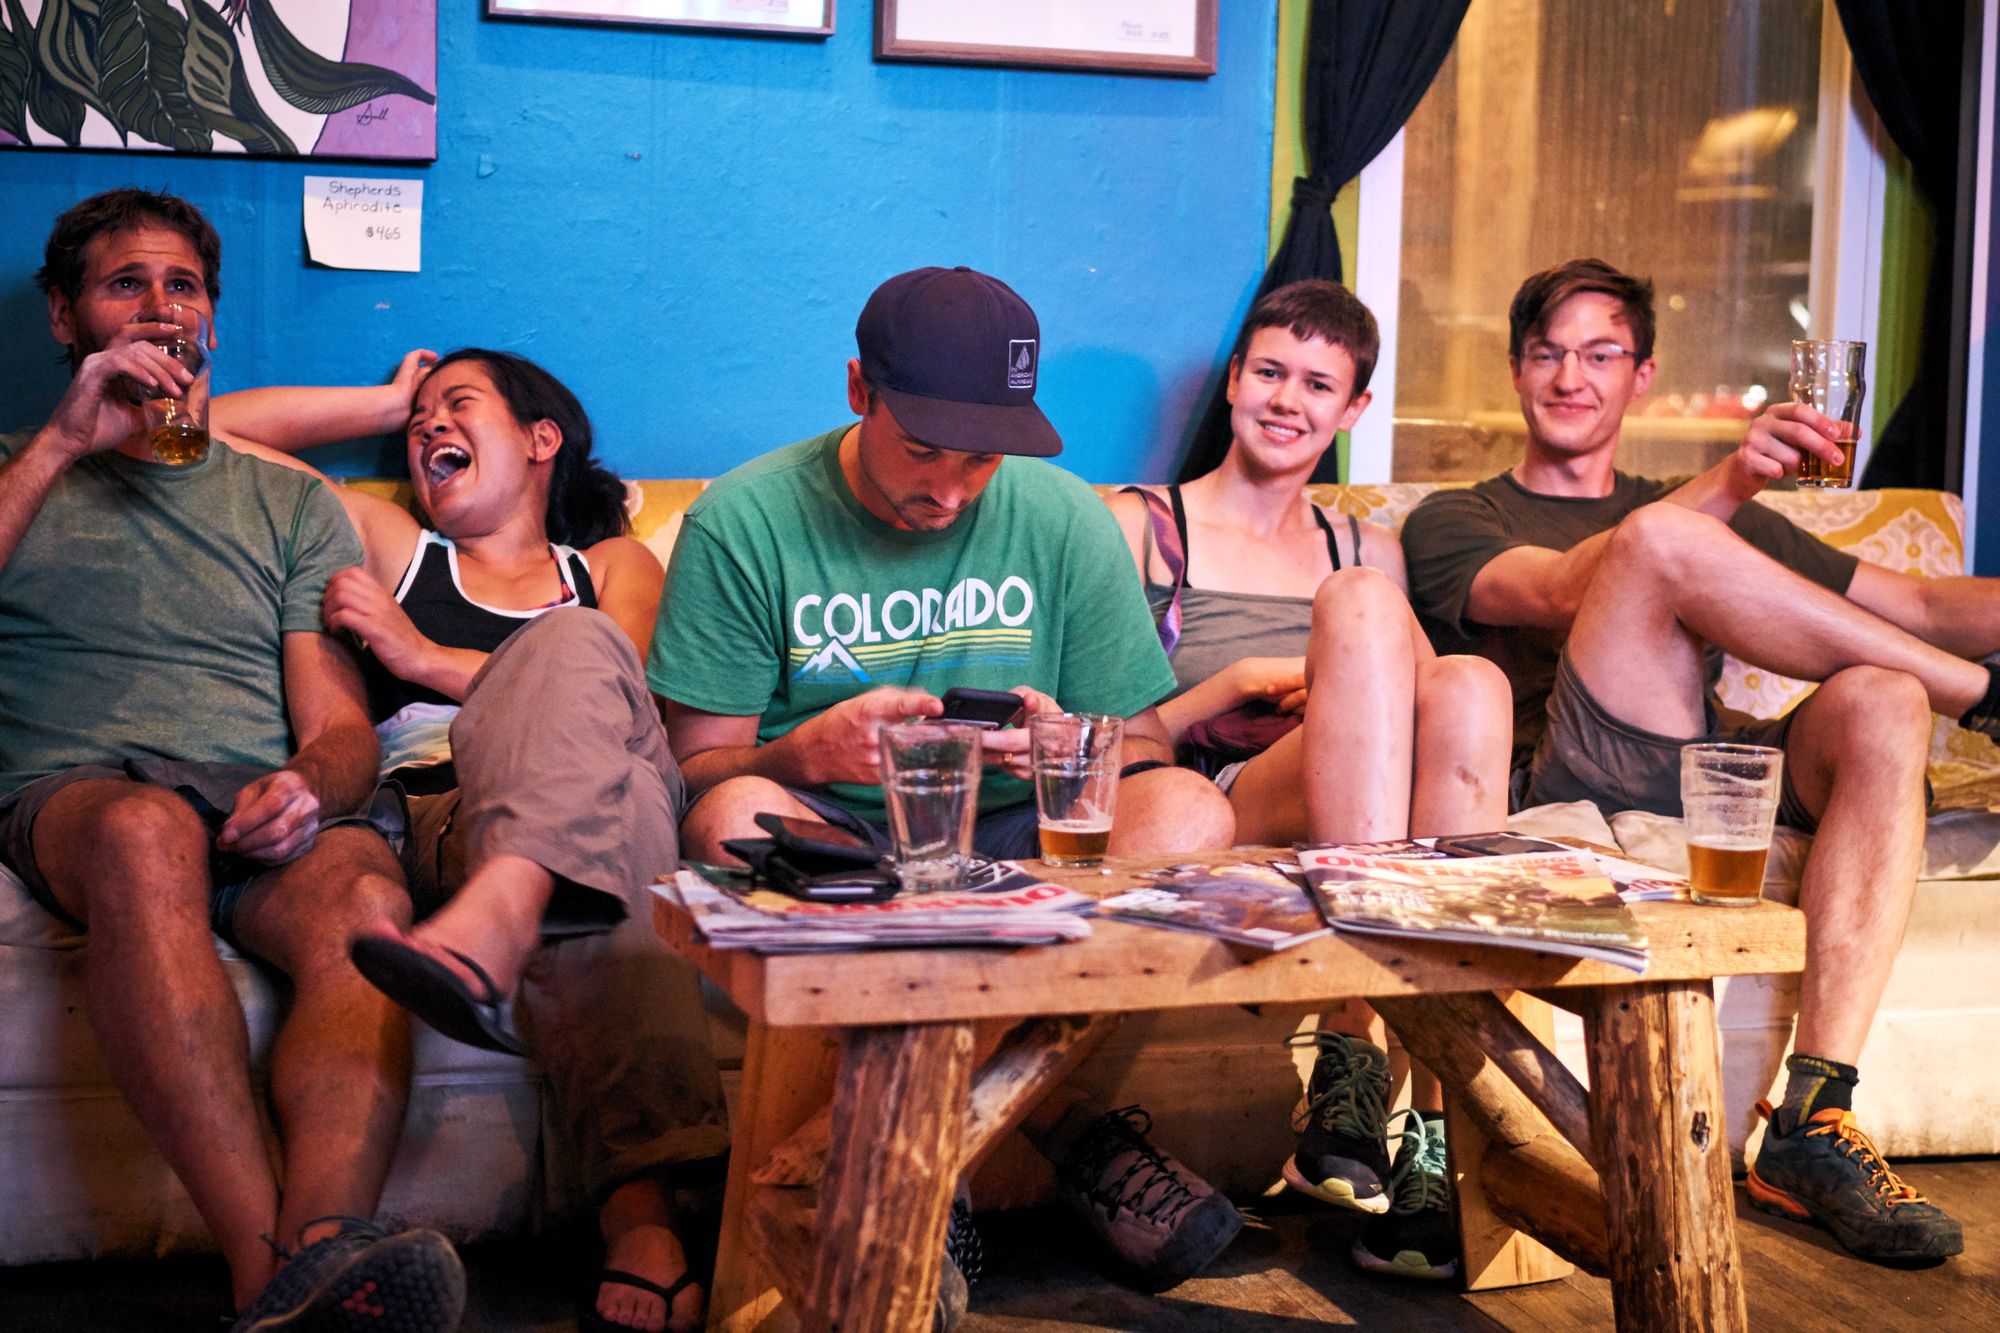 Group of people laughing and driking on a sofa at a restaurant.